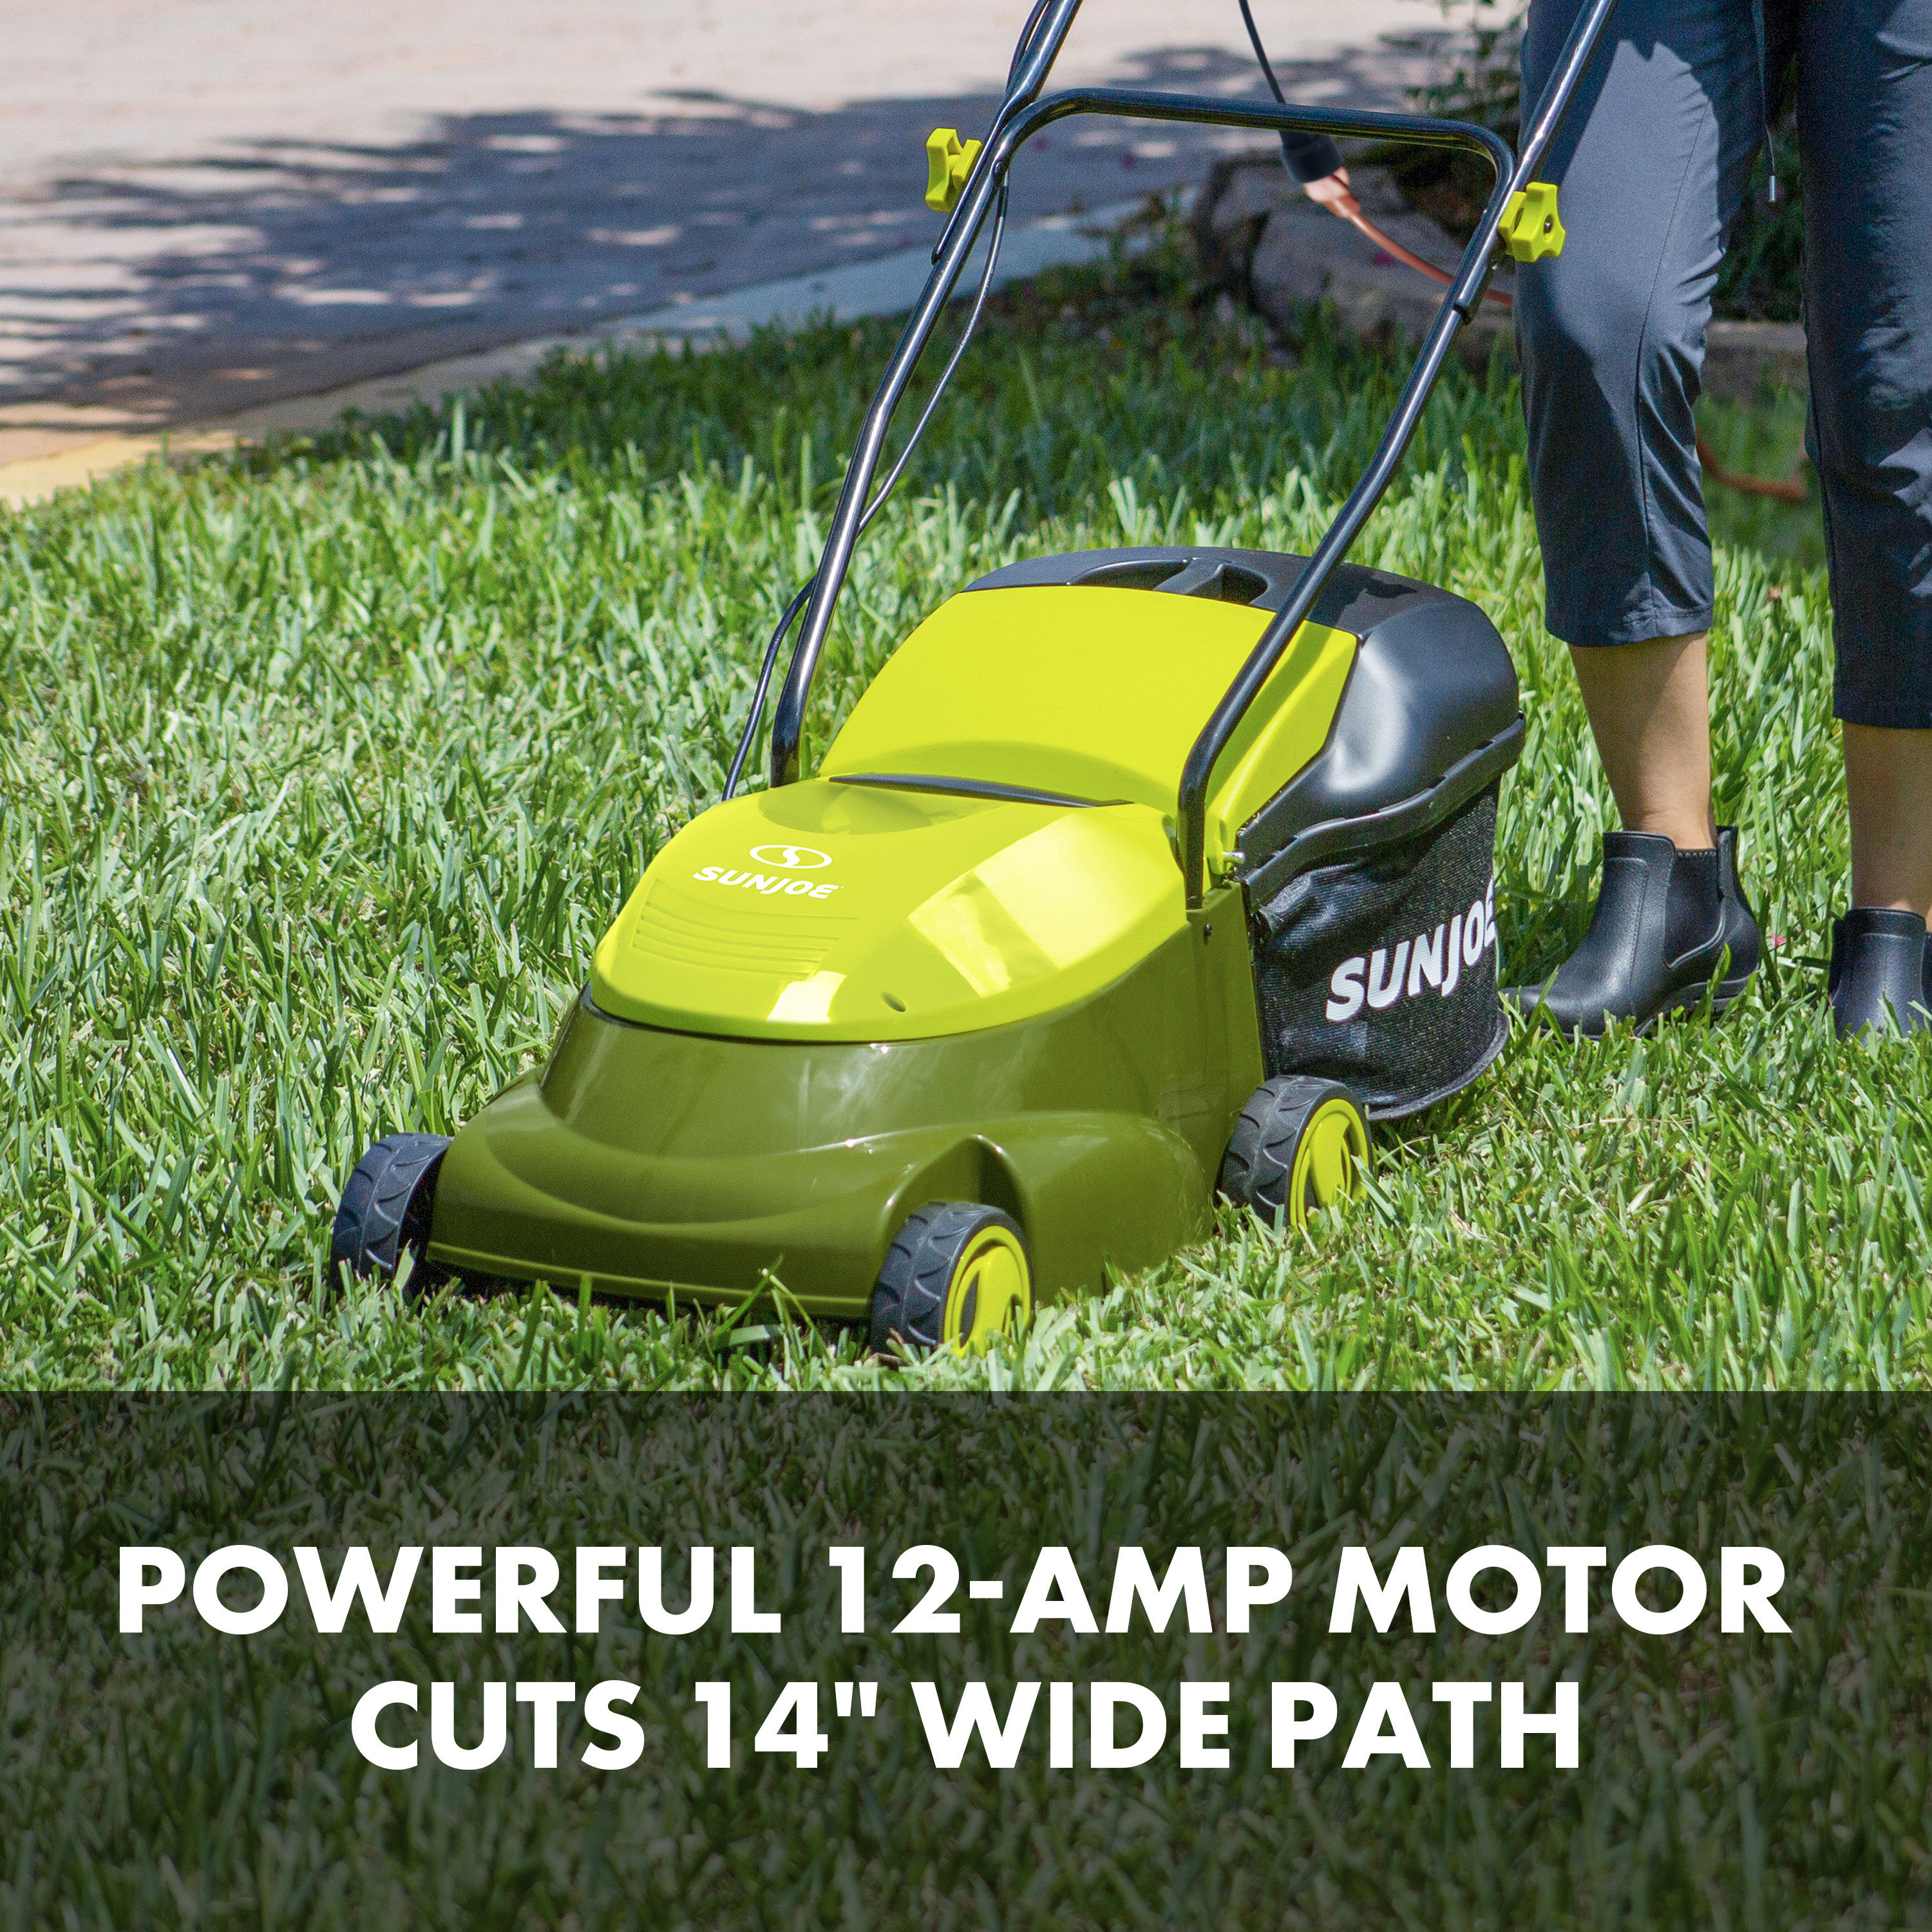 Sun Joe Electric 16-inch Lawn Mower W/ Collection Bag, 12-Amp, 6-Position 